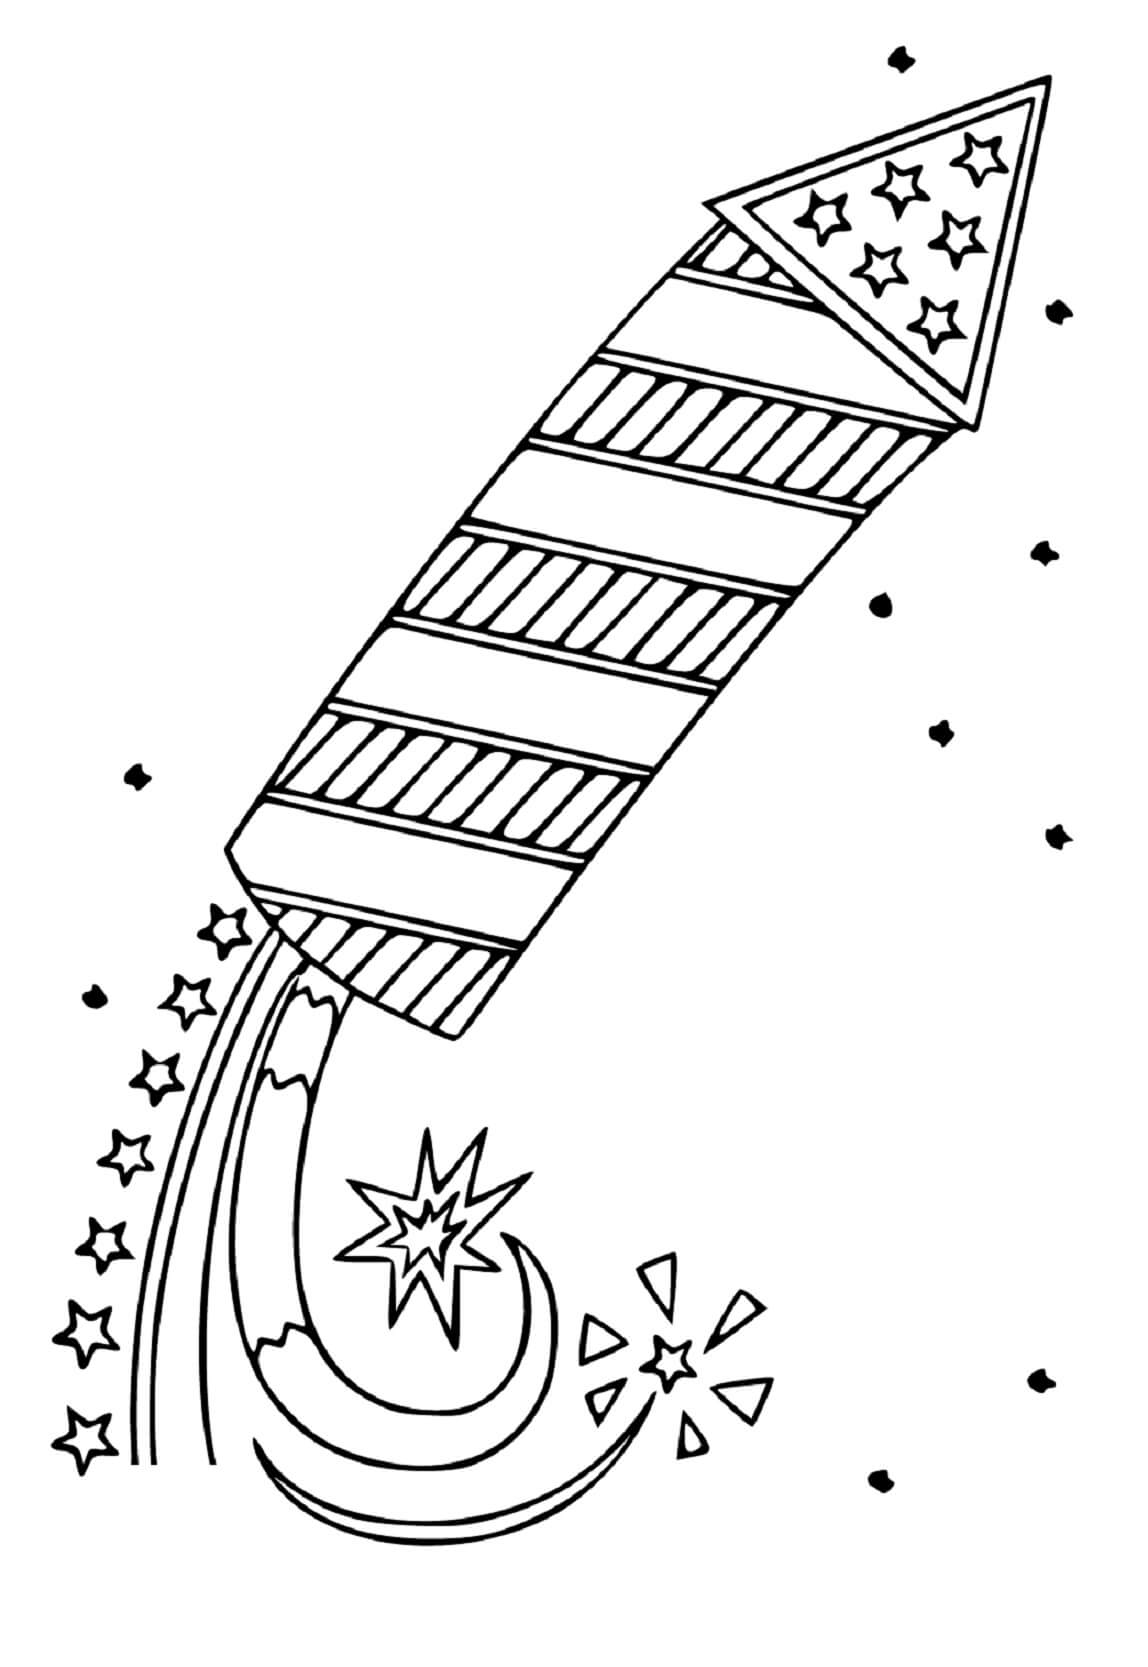 rocket-free-graphics-png-coloring-page-download-print-or-color